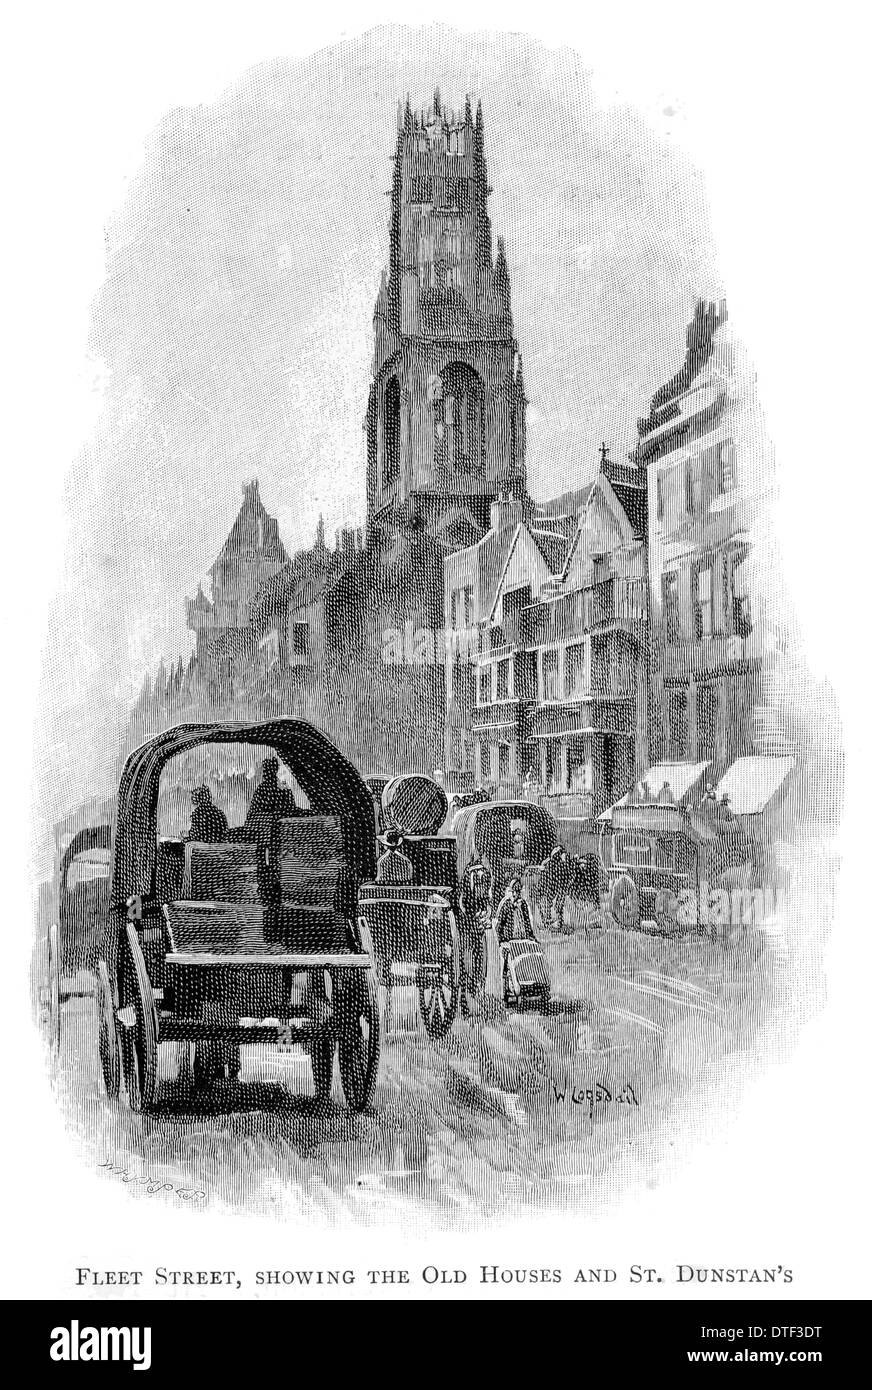 Fleet Street, Showing the old houses and Saint Dunstan's Circa 1890 Stock Photo